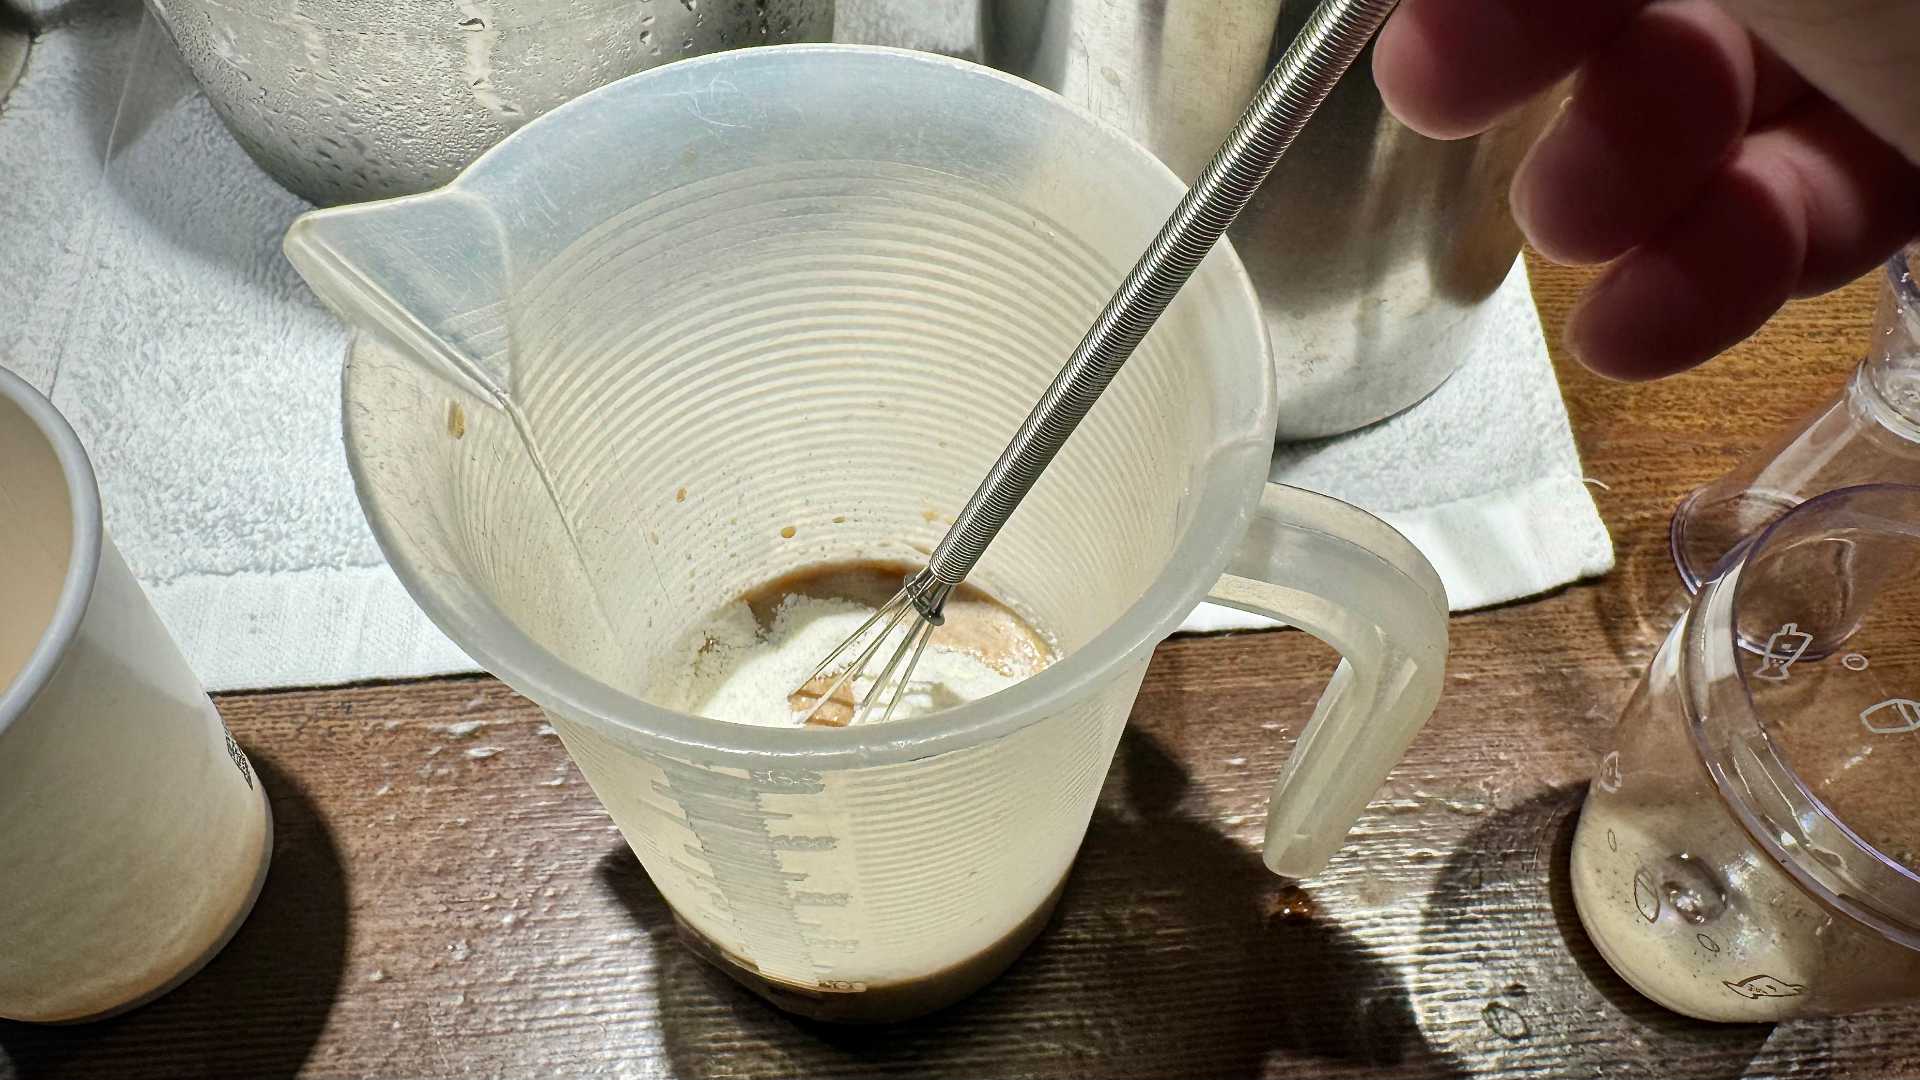 A small handheld whisk mixing black tea and creamer.